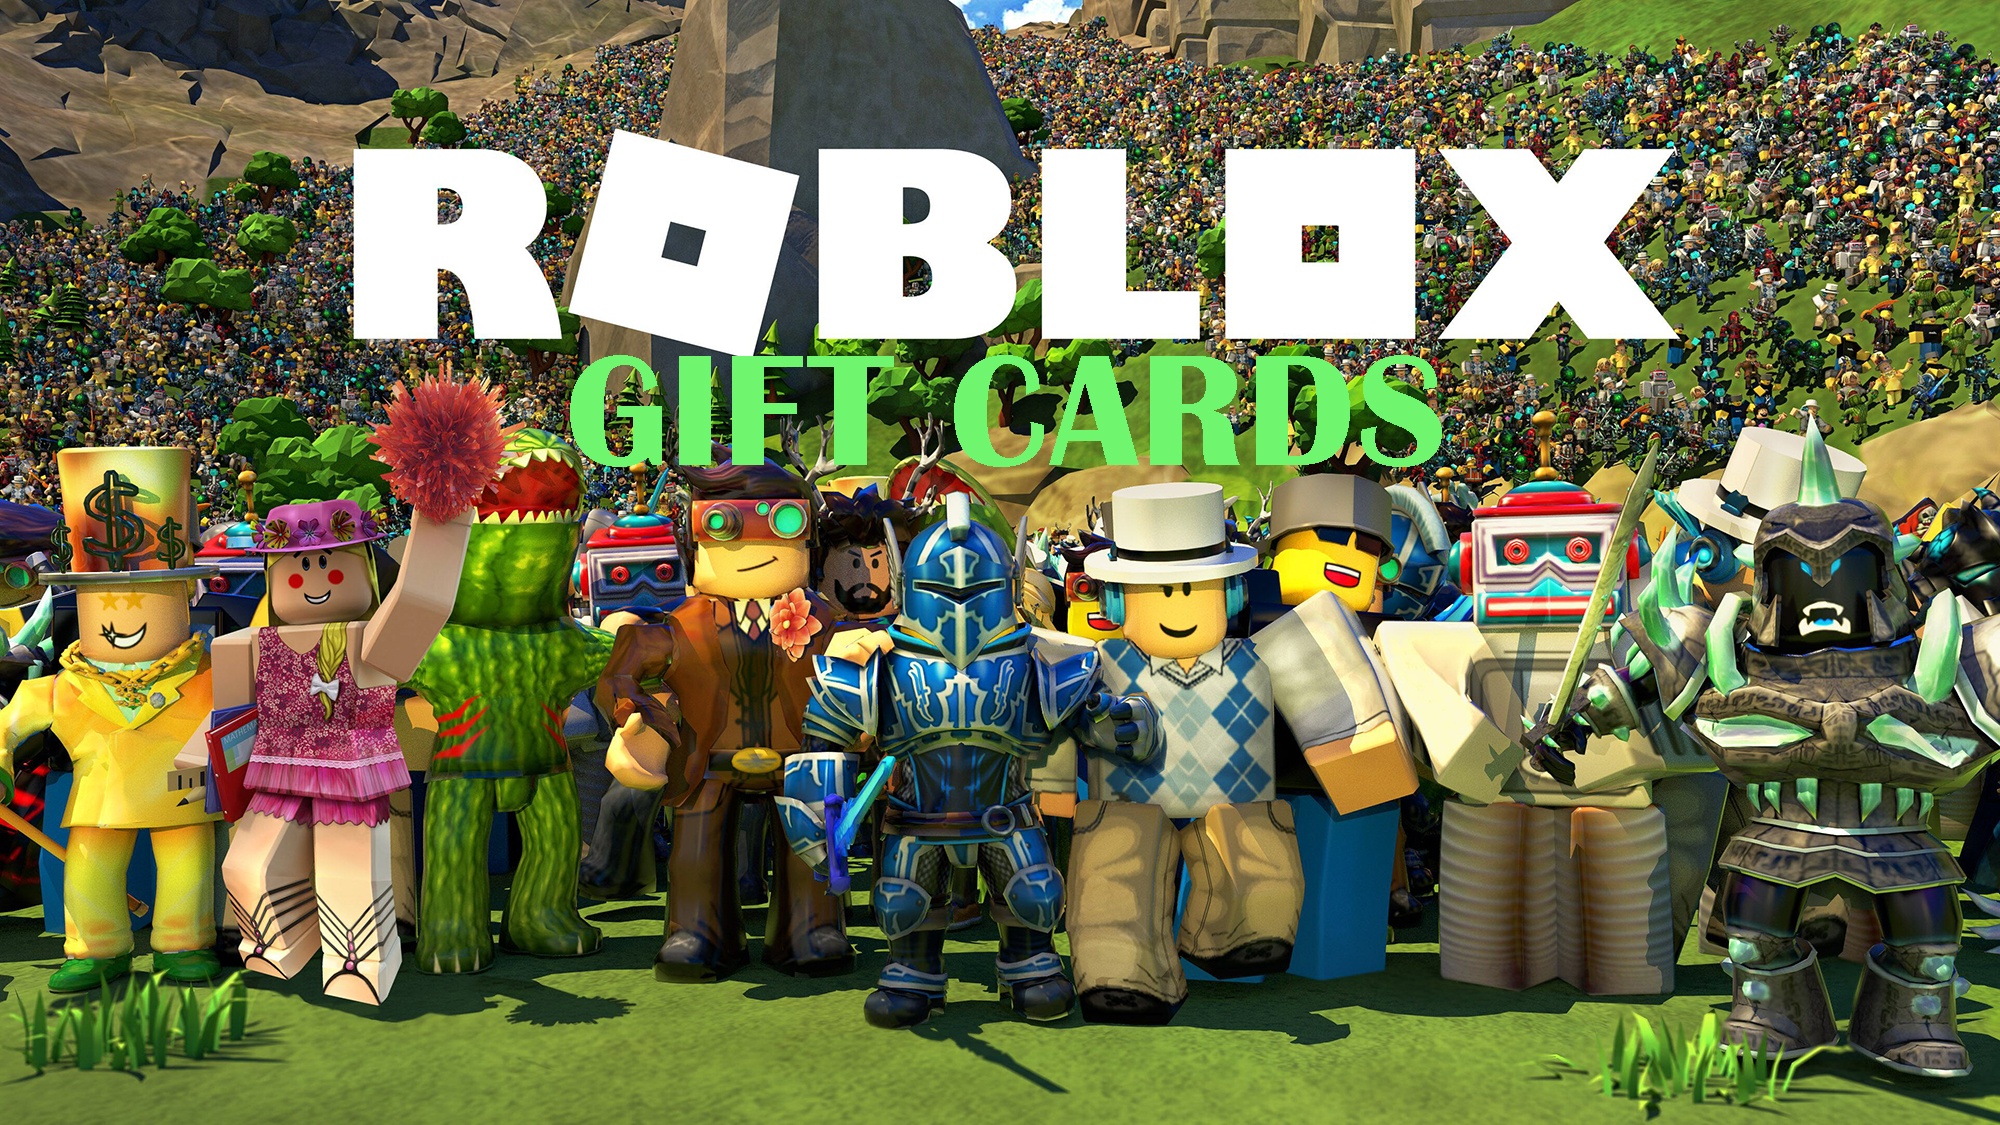 How To Get Free Roblox Gift Card Codes Unused No Survey Super Easy - robux gifts cards